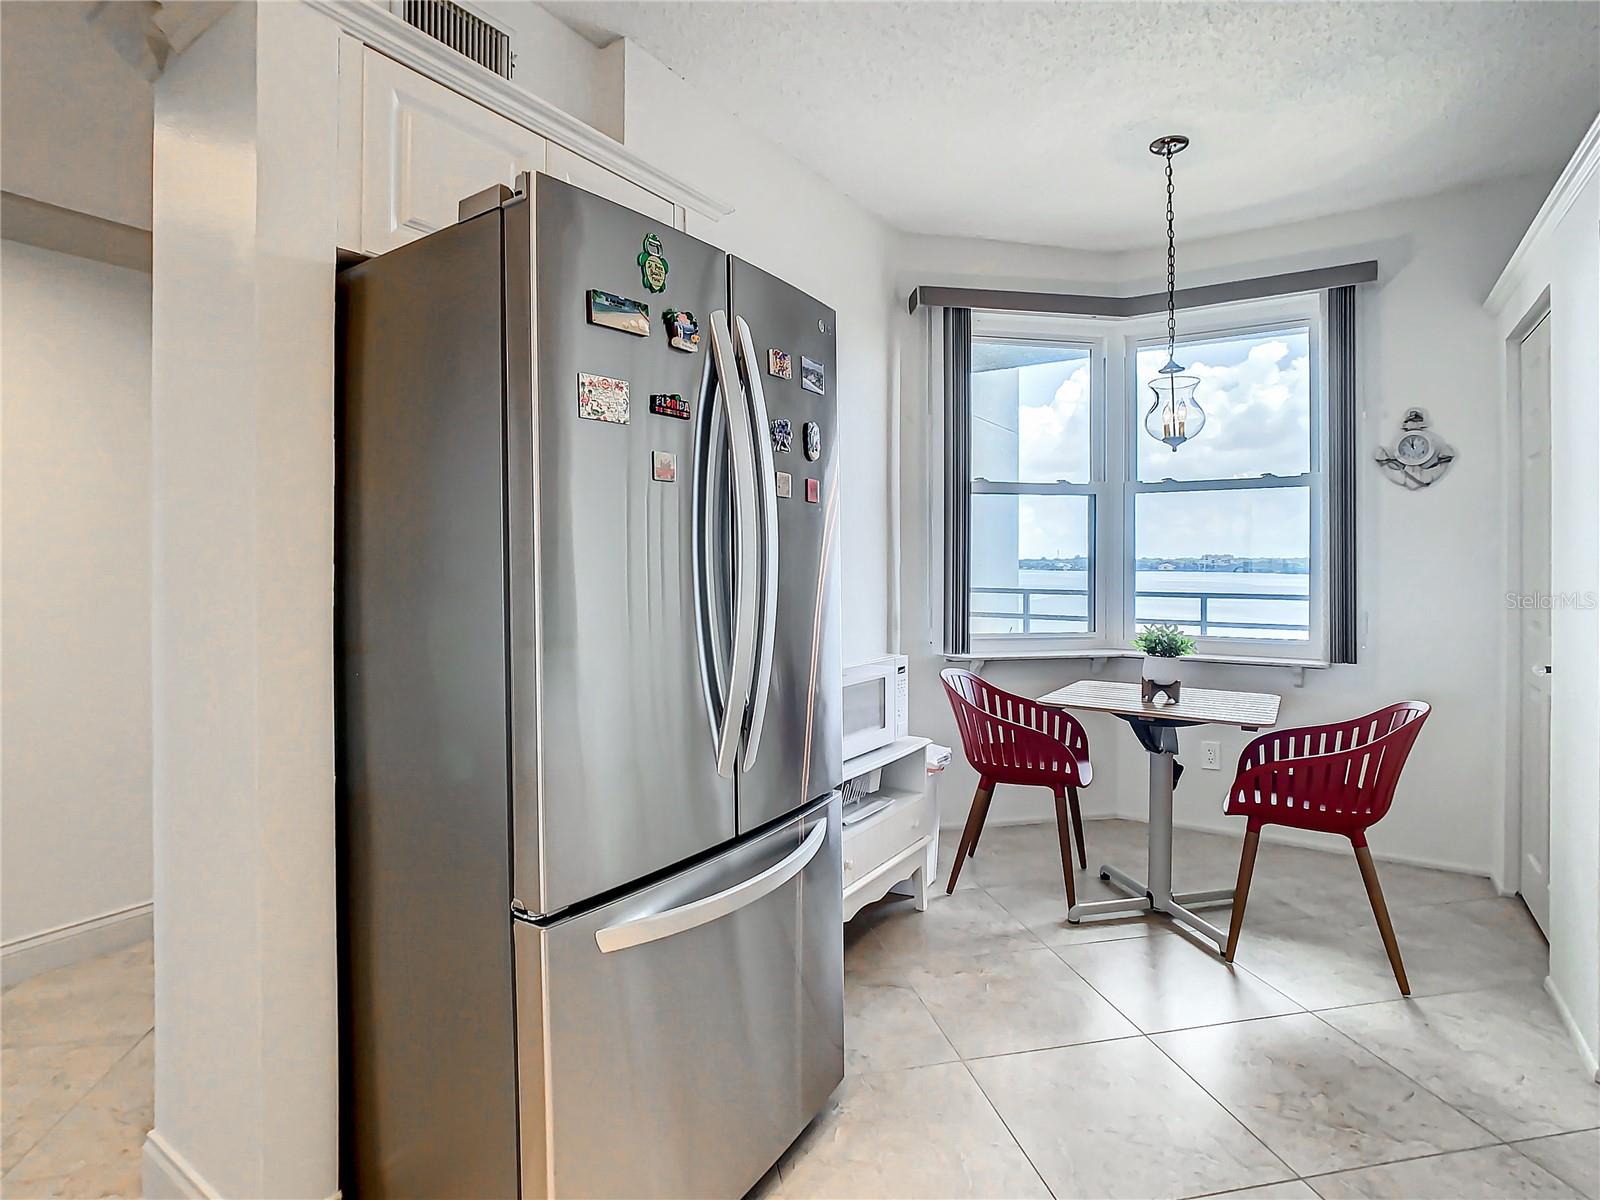 This kitchen comes with a stainless steel French door refrigerator.  Notice the nice water view you can enjoy siping your morning coffee or tea